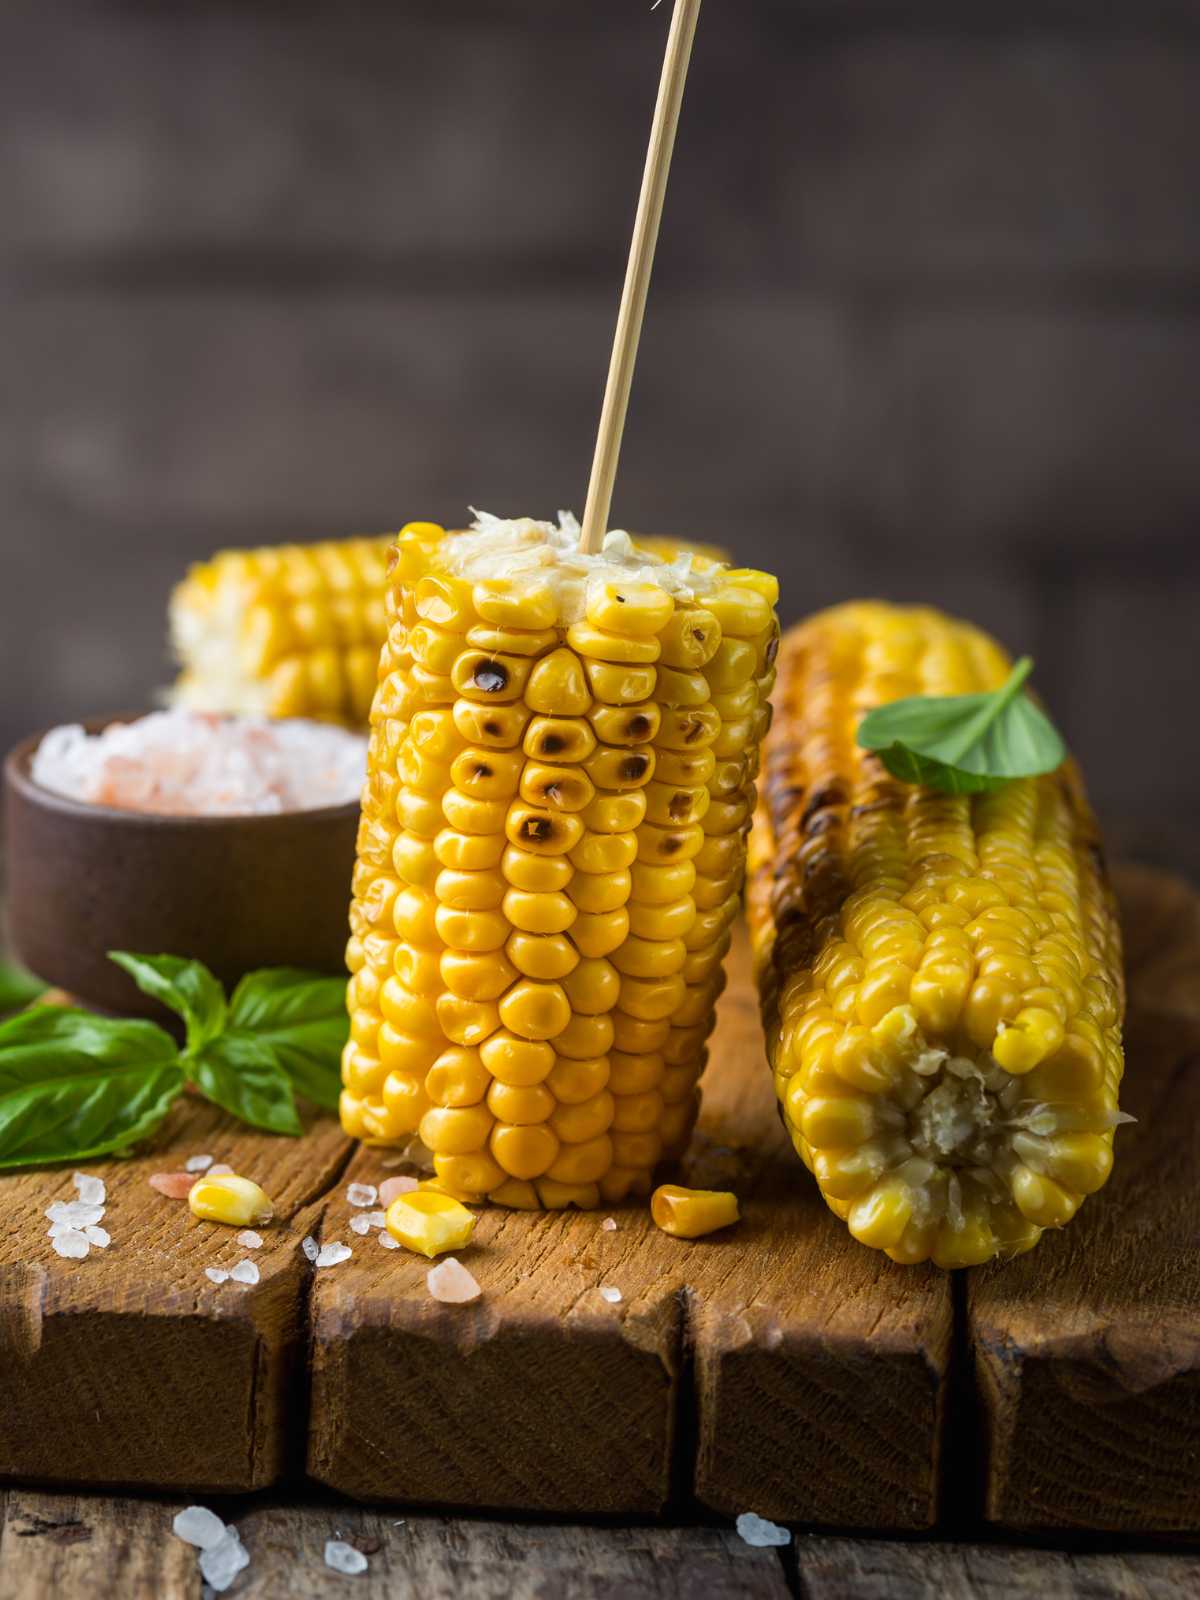 Is Corn Good for You?